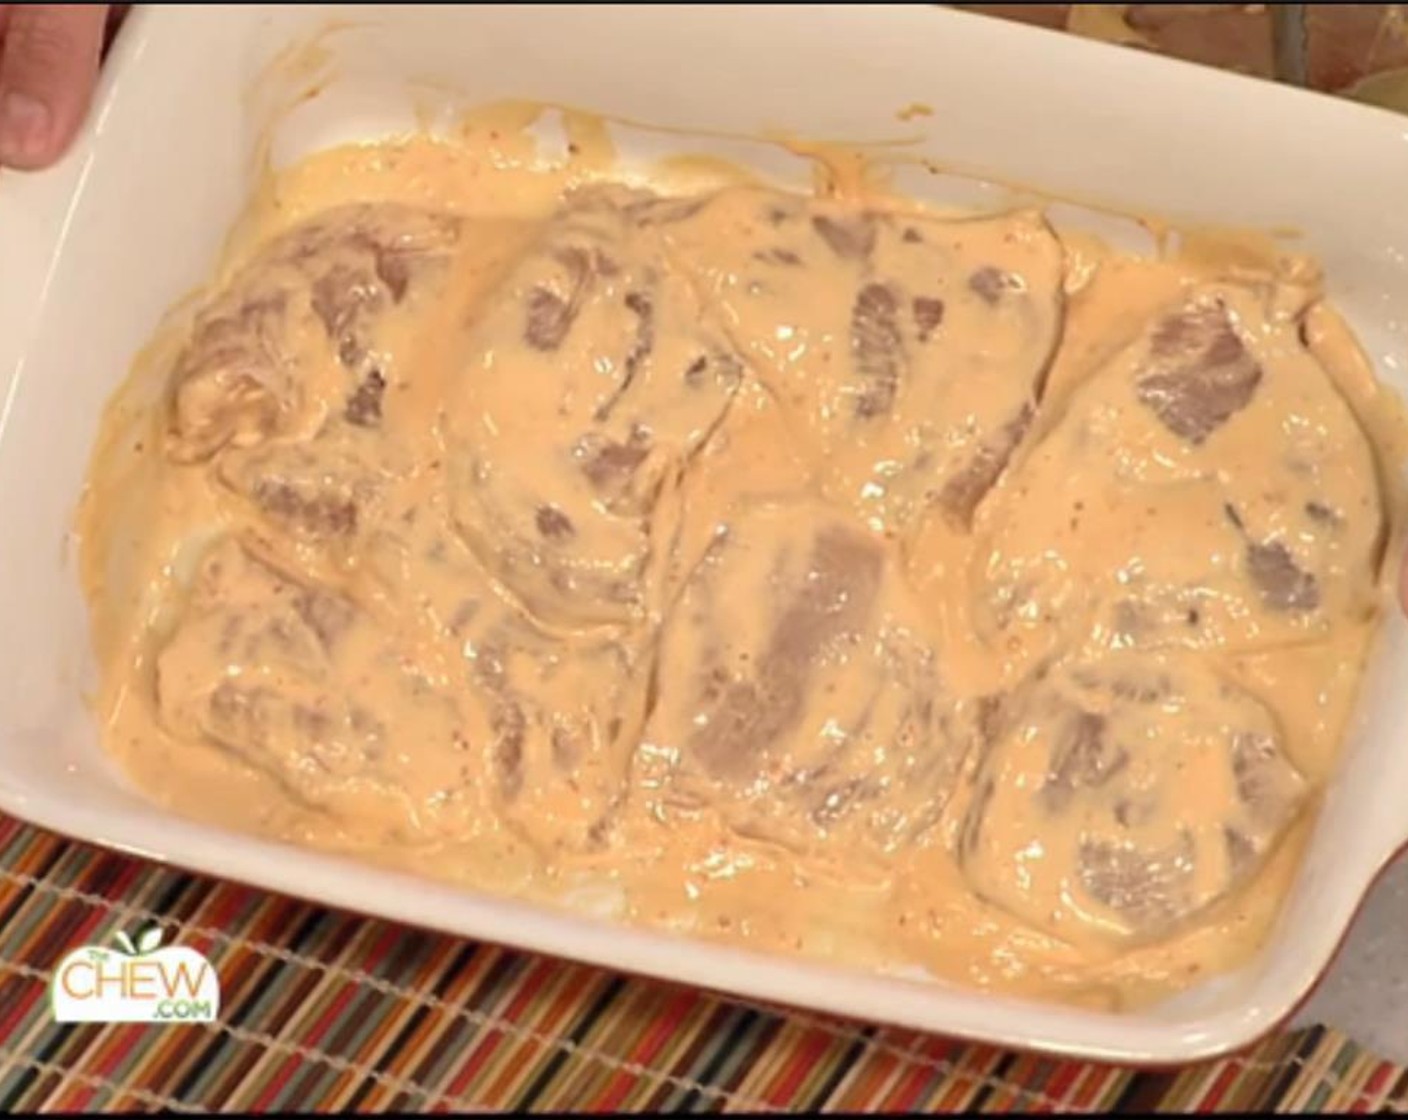 step 2 Pour the Sweet Chili Ranch Dressing (2 cups) over the chicken. Toss to evenly coat with the dressing. Cover the baking dish with plastic wrap and place in the refrigerator to marinate for 2 hours or up to overnight.